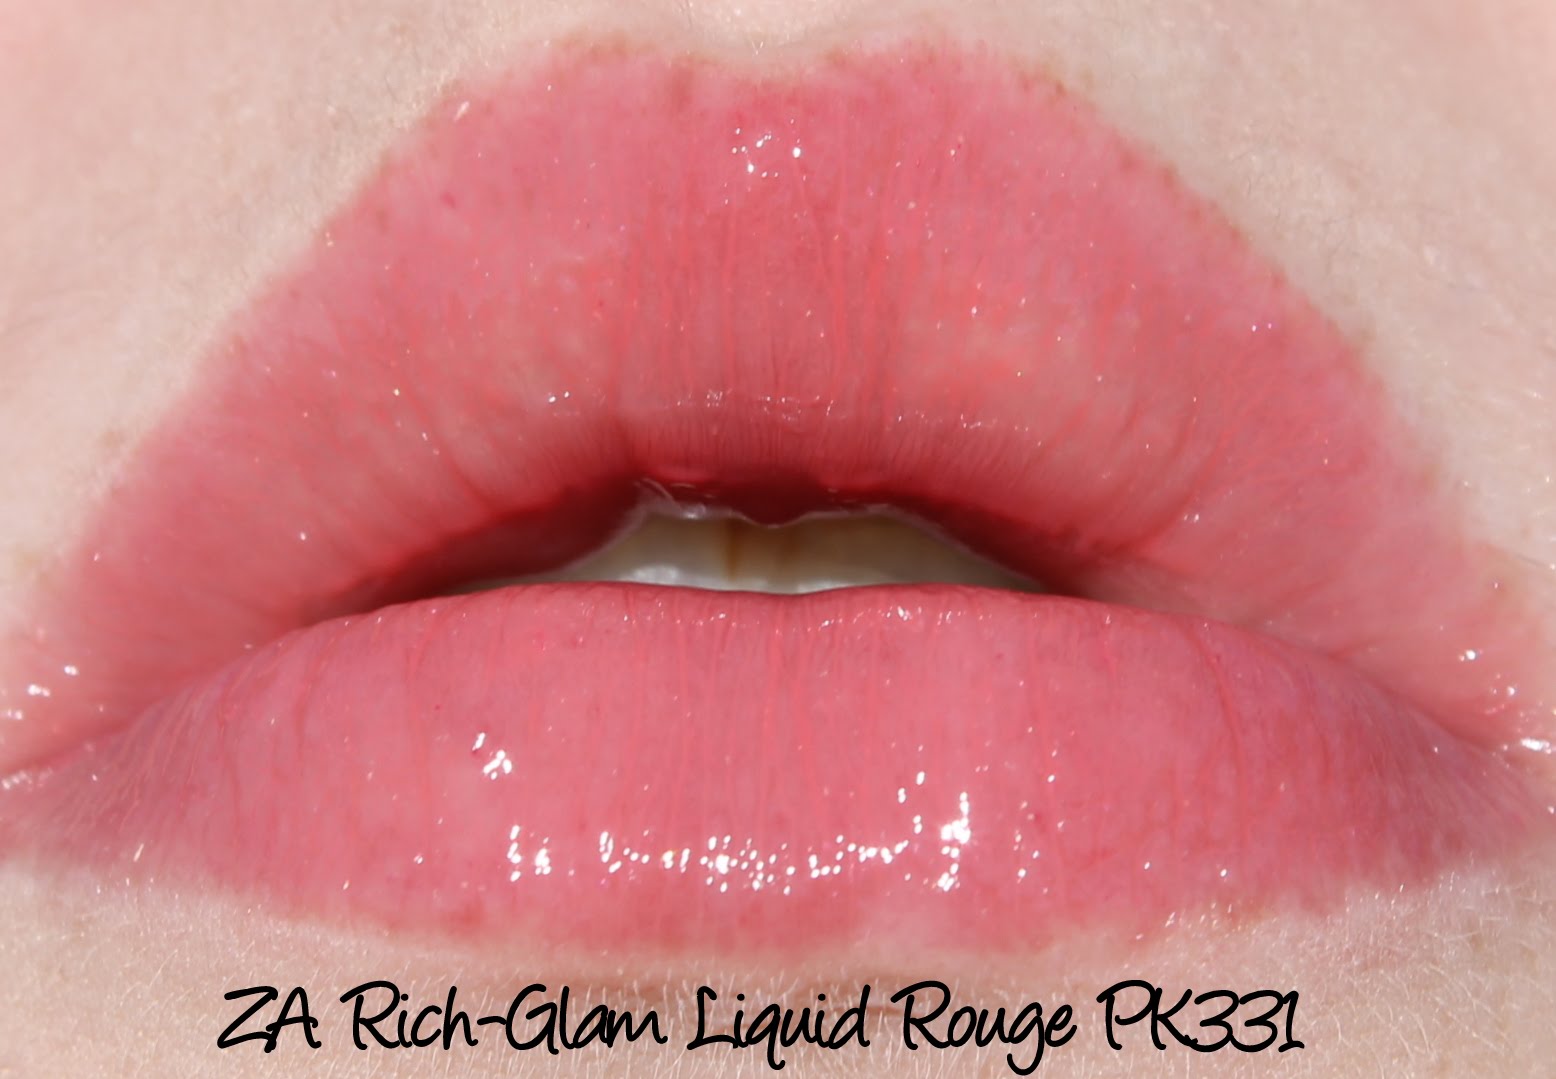 ZA Rich-Glam Liquid Rouge - PK331 Swatches & Review